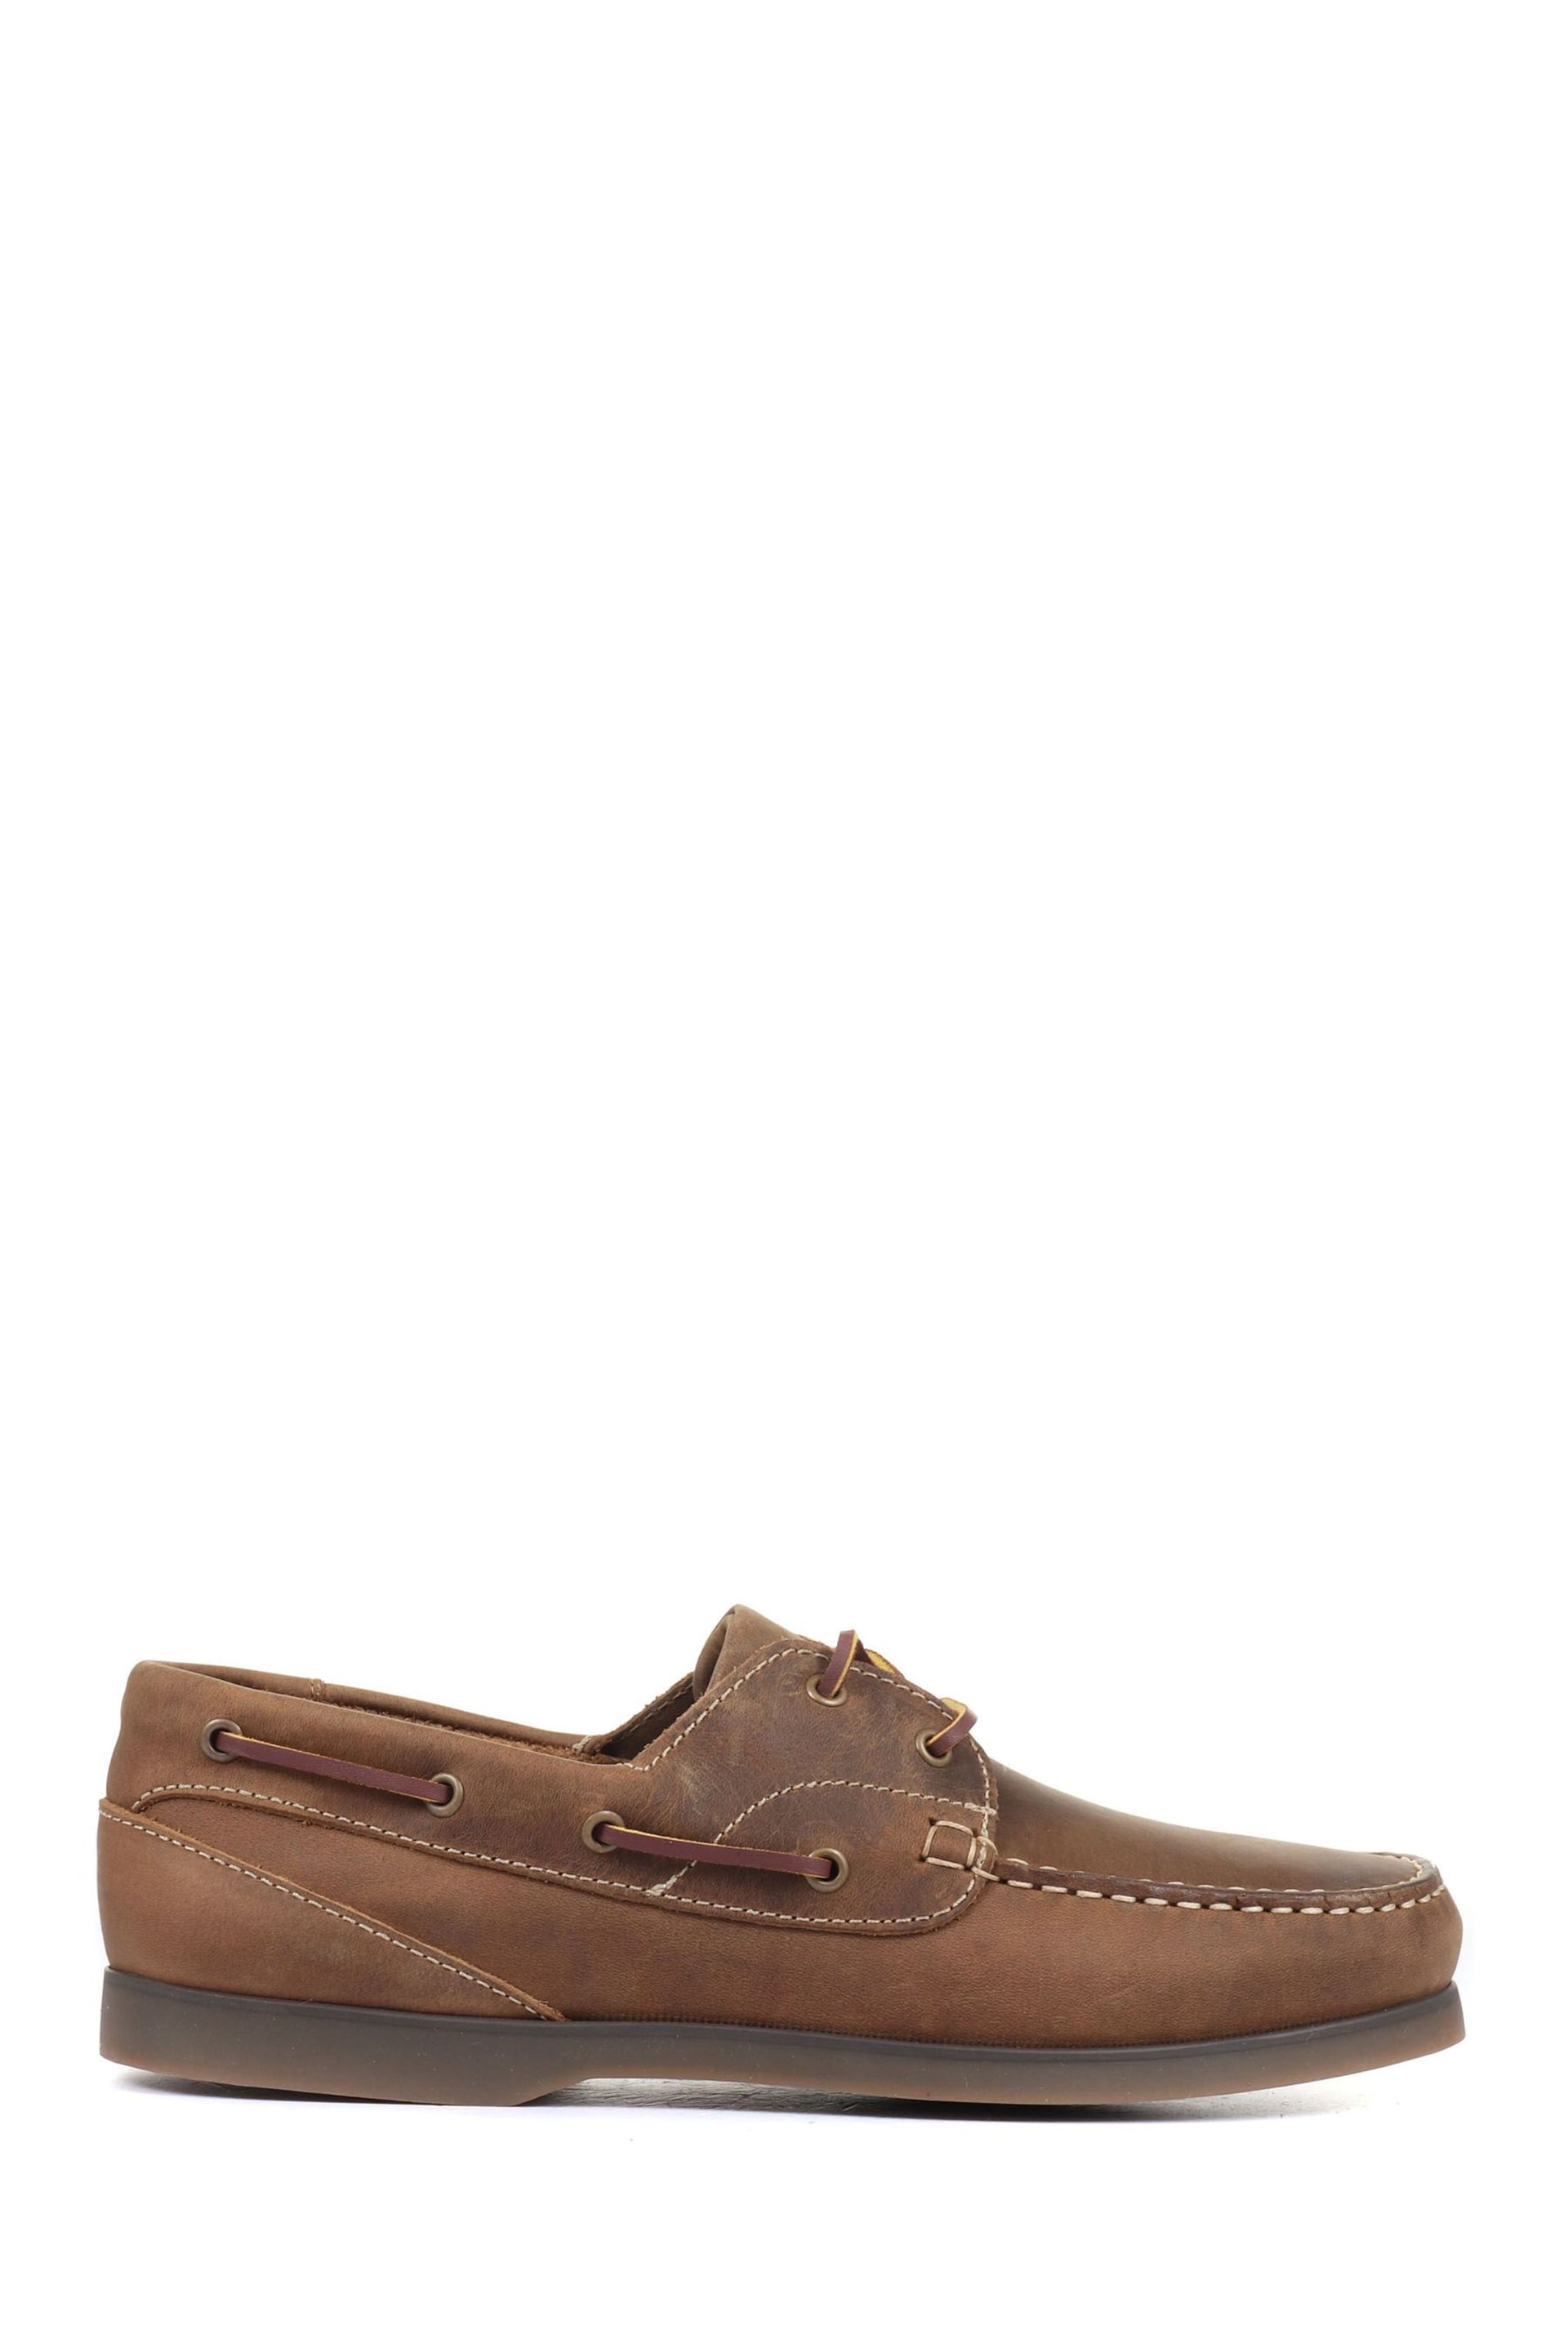 Jones Bootmaker Parsons Leather Boat Brown Shoes - Image 1 of 5